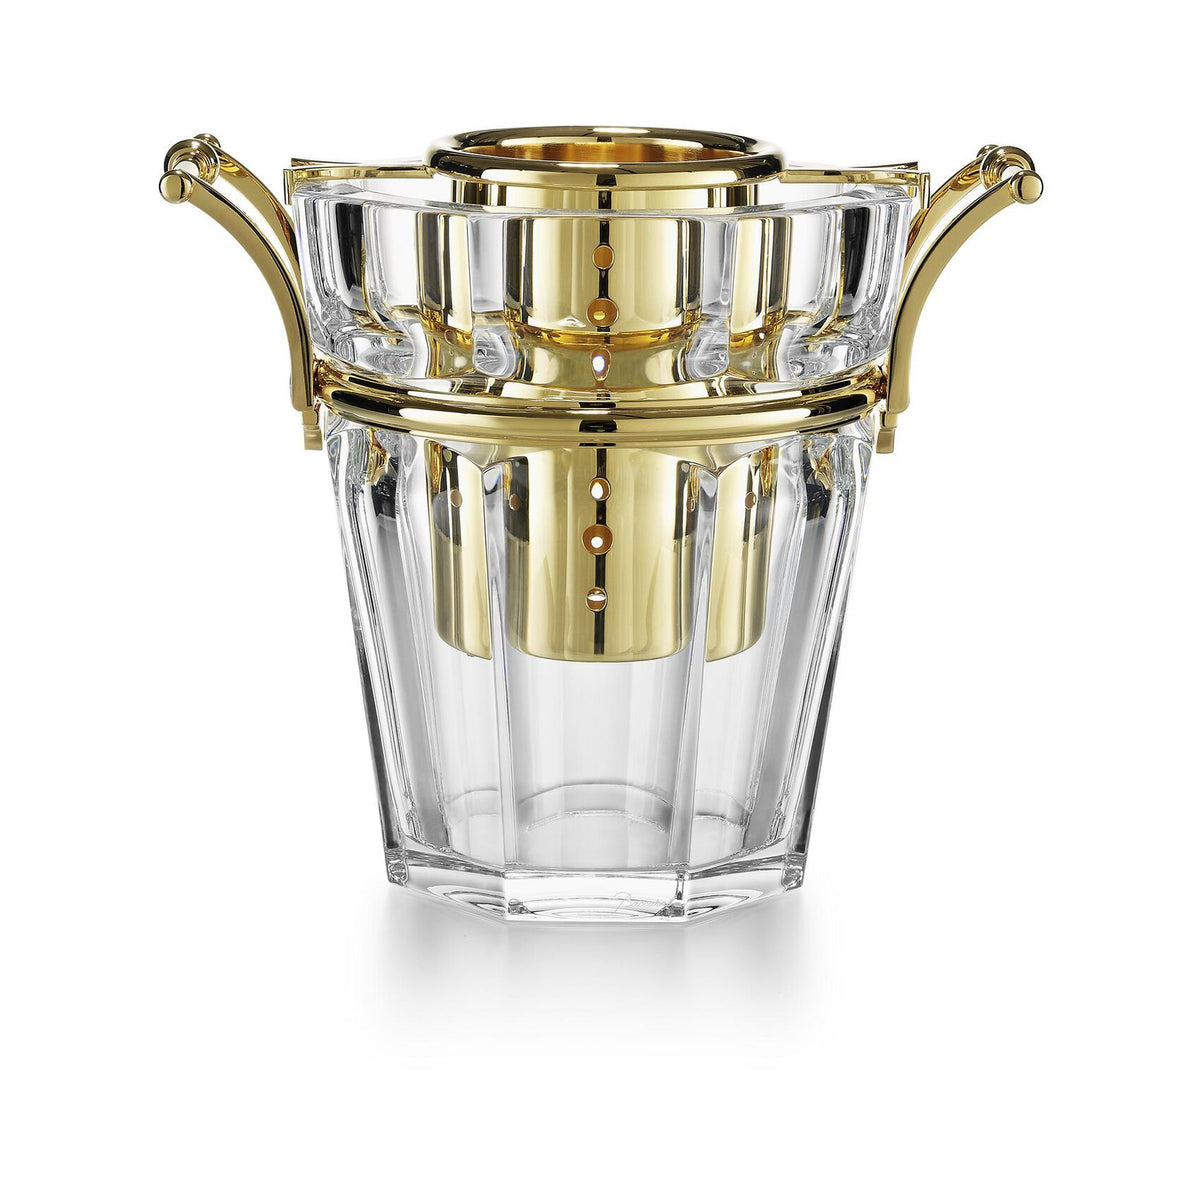 Harcourt Champagne Cooler